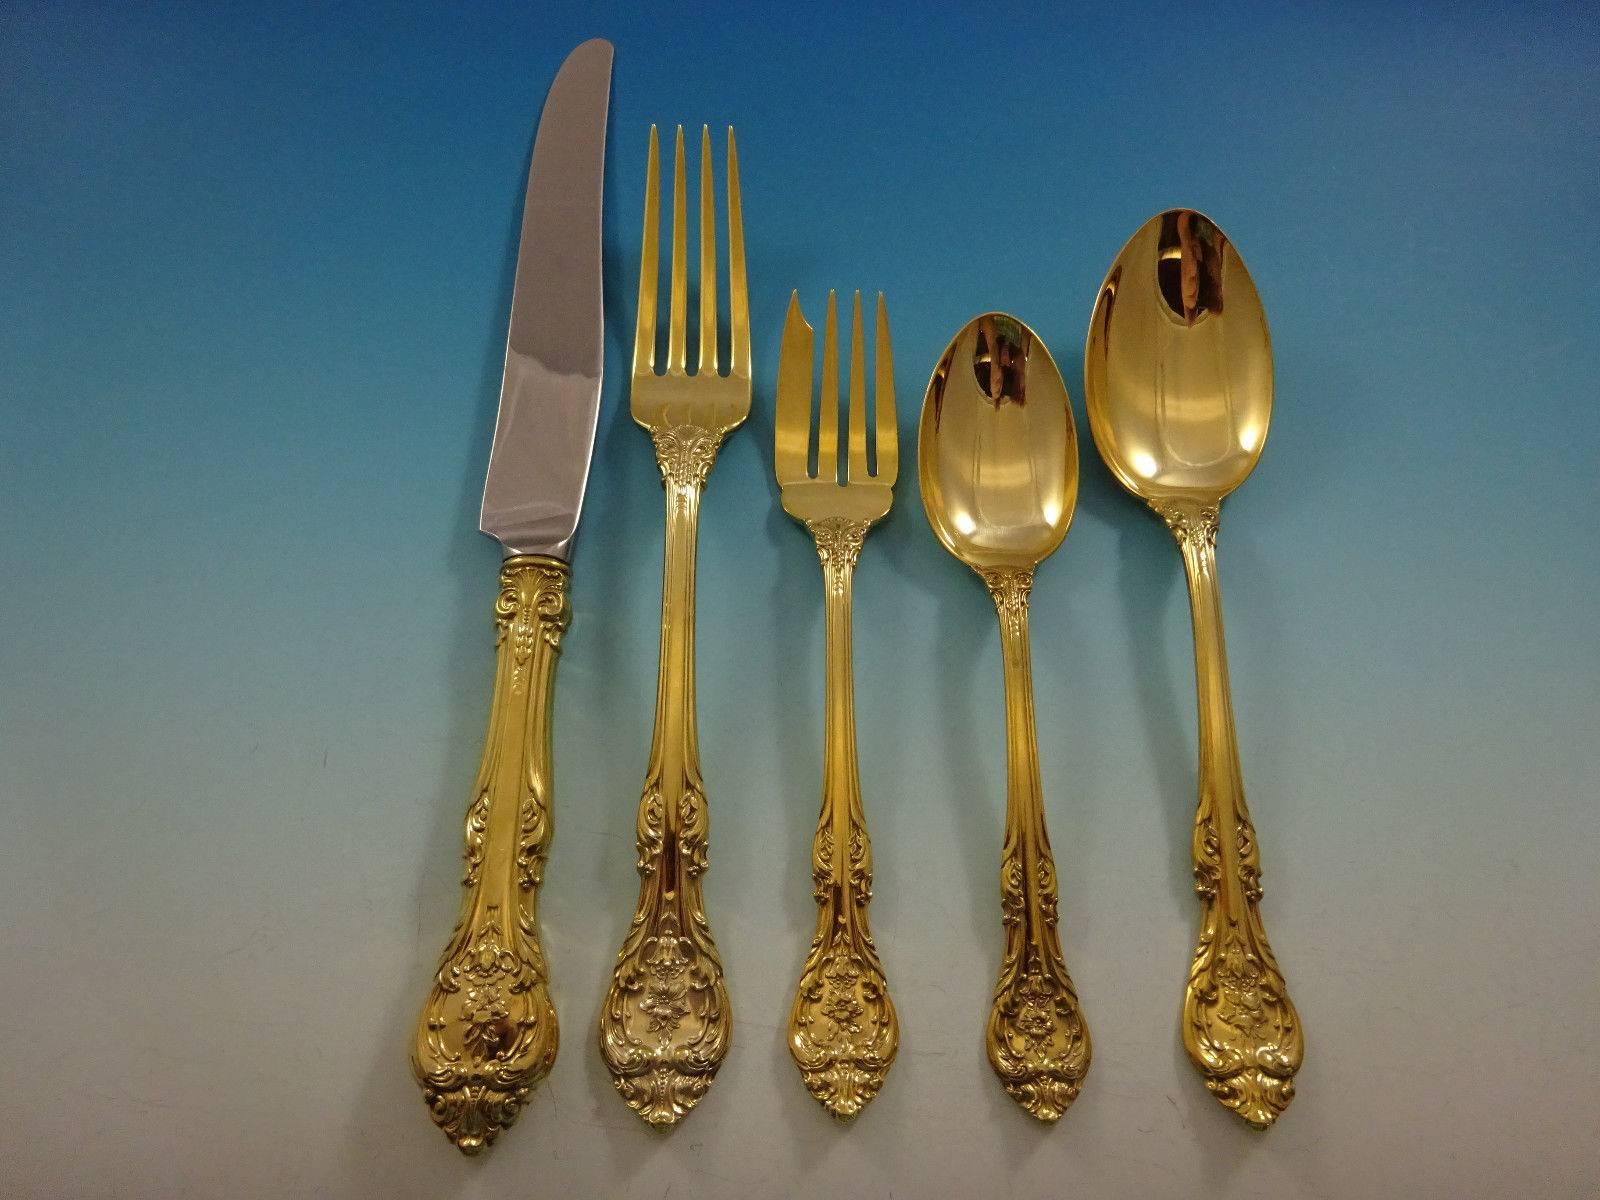 King Edward by Gorham Gold Sterling Silver Flatware Set Service 42 Pcs Dinner In Excellent Condition For Sale In Big Bend, WI